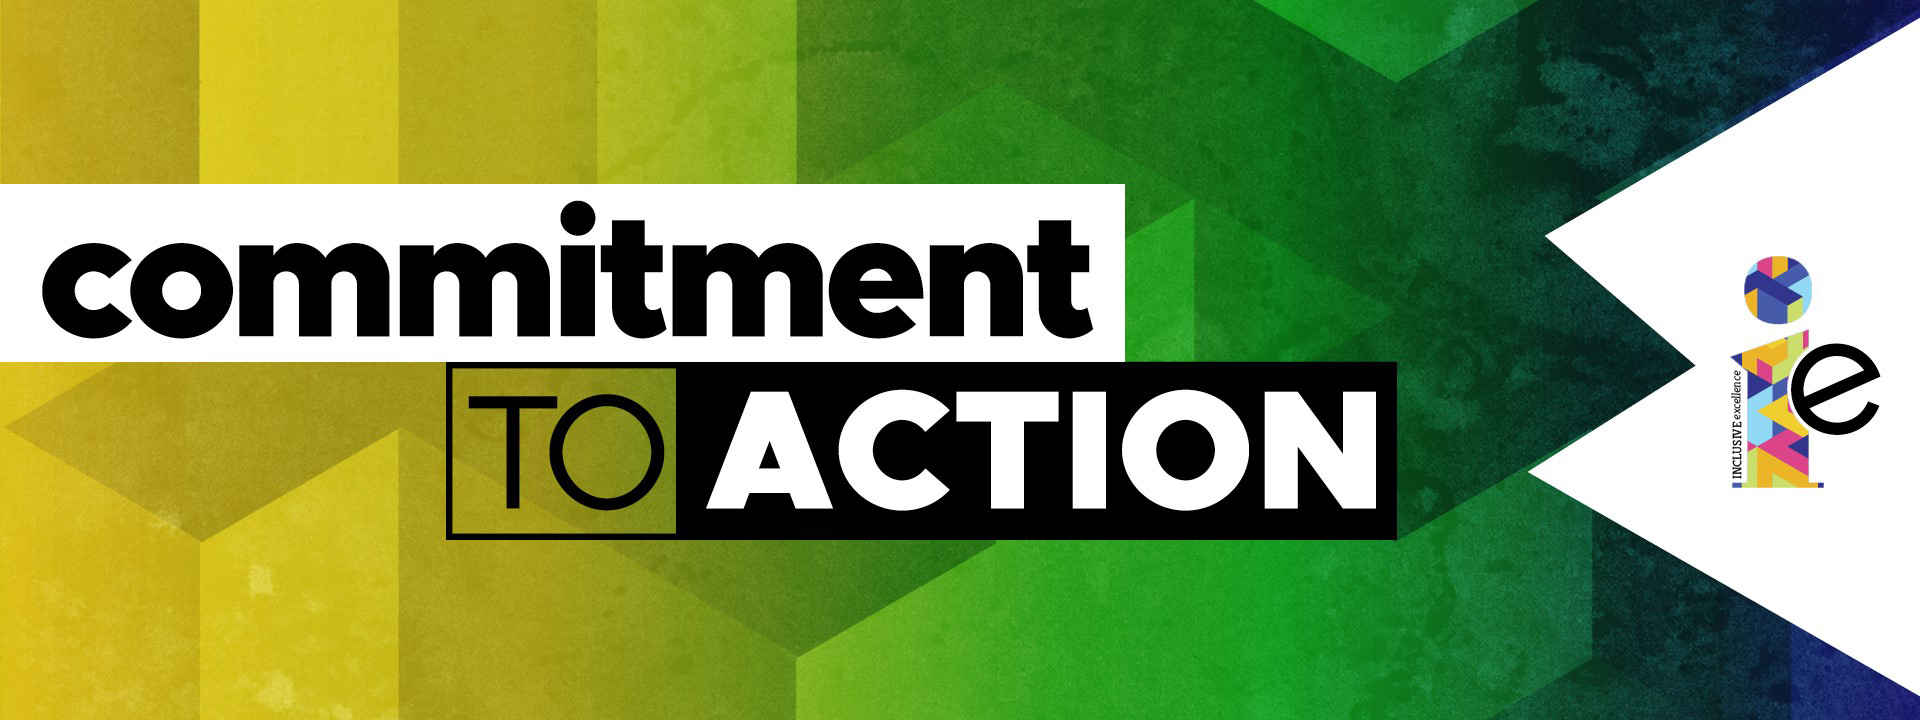 Graphic with geometric shapes in various colors with text that says commitment to action.